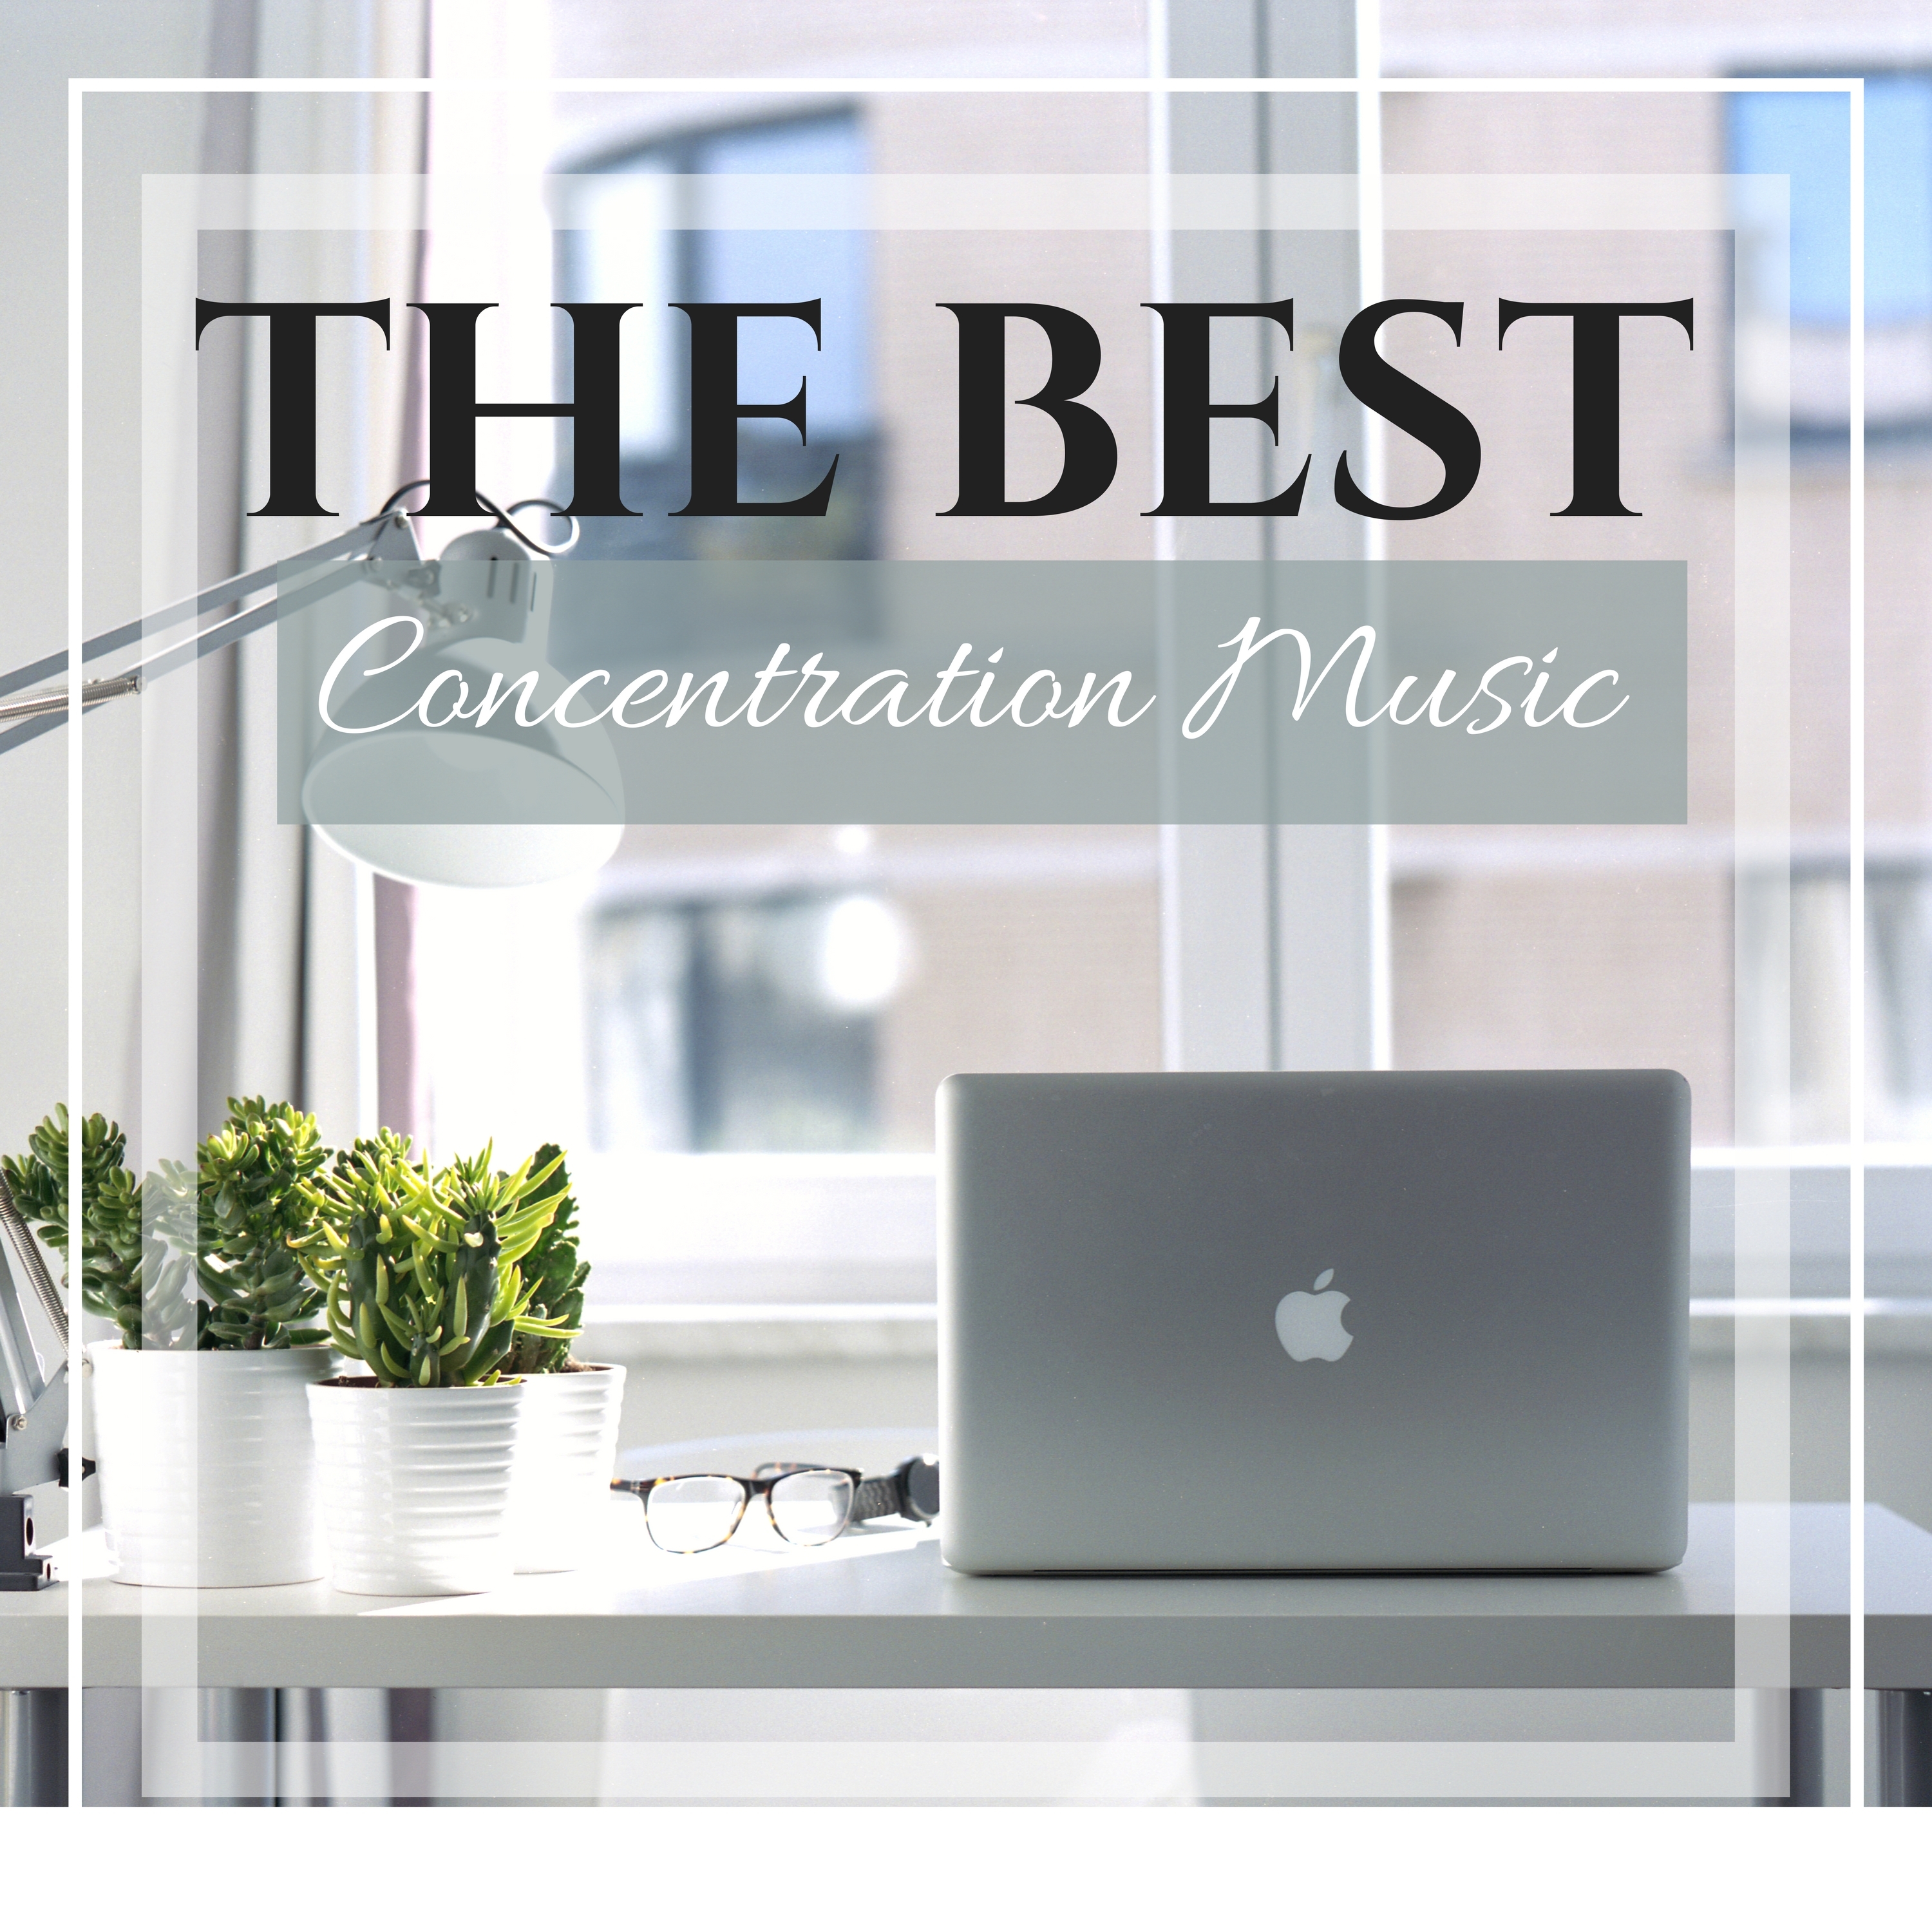 The Best Concentration Music - Soft Atmosphere for Harmonic Workplace & Good Day